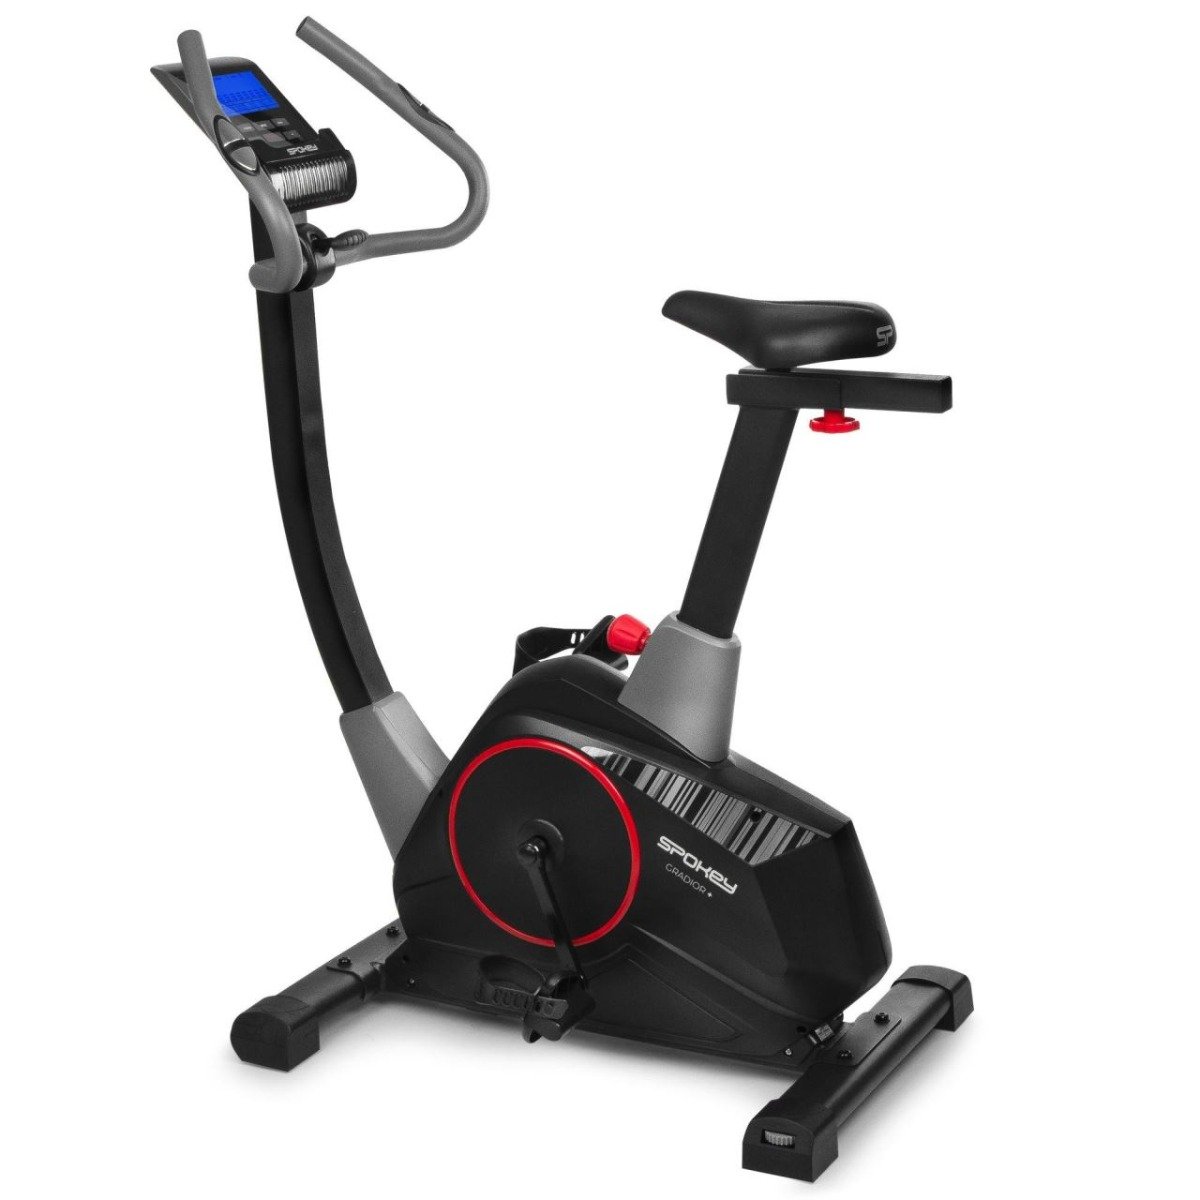 Bicicleta Fitness Magnetica, DHS, Gradior + DHS